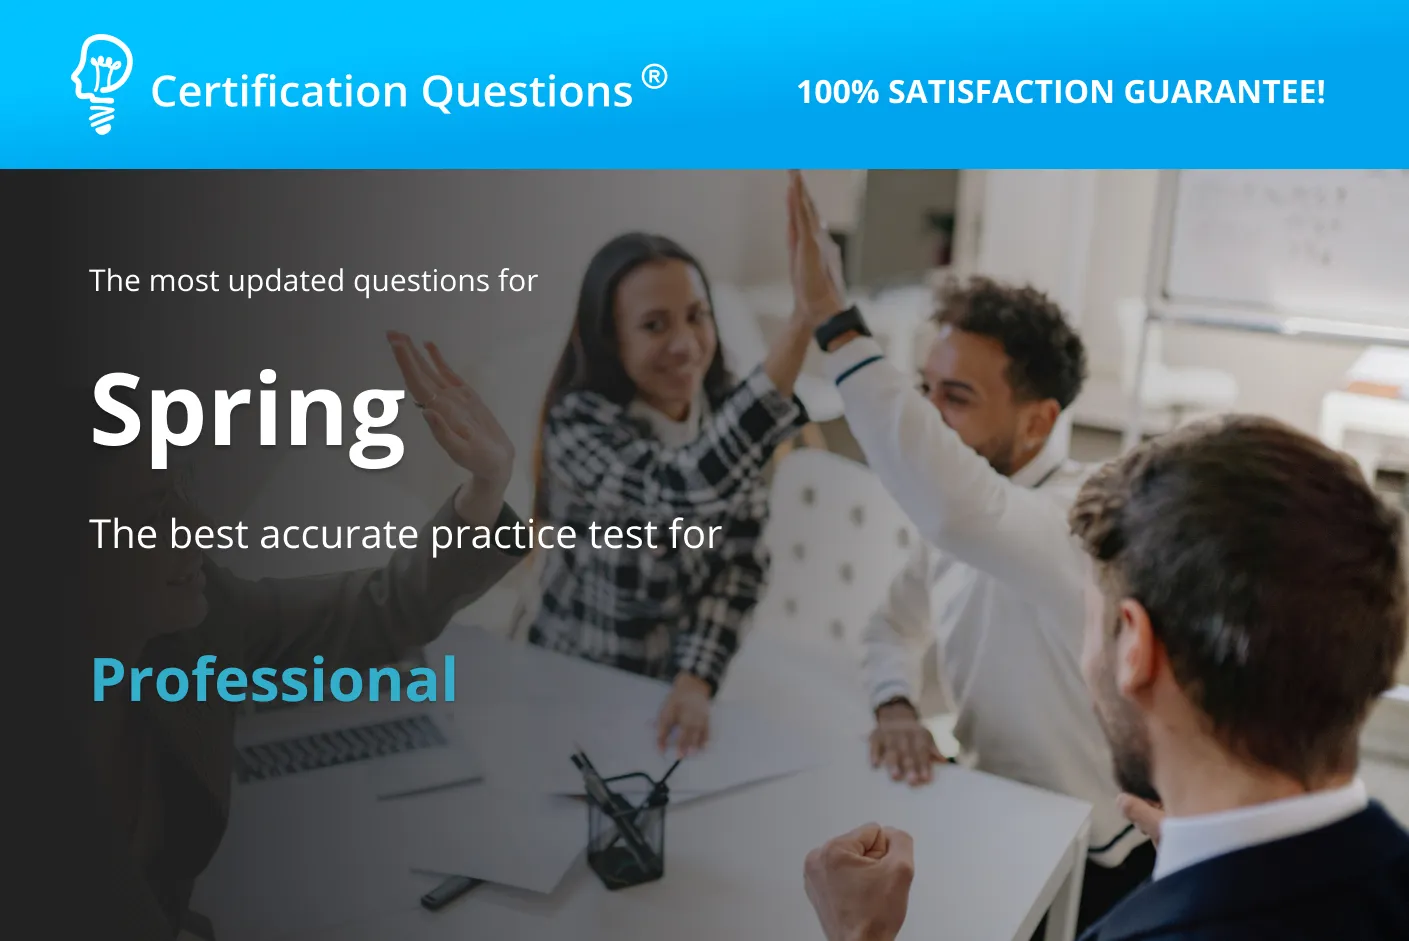 This guide is related to Spring certified professional mock practice exam